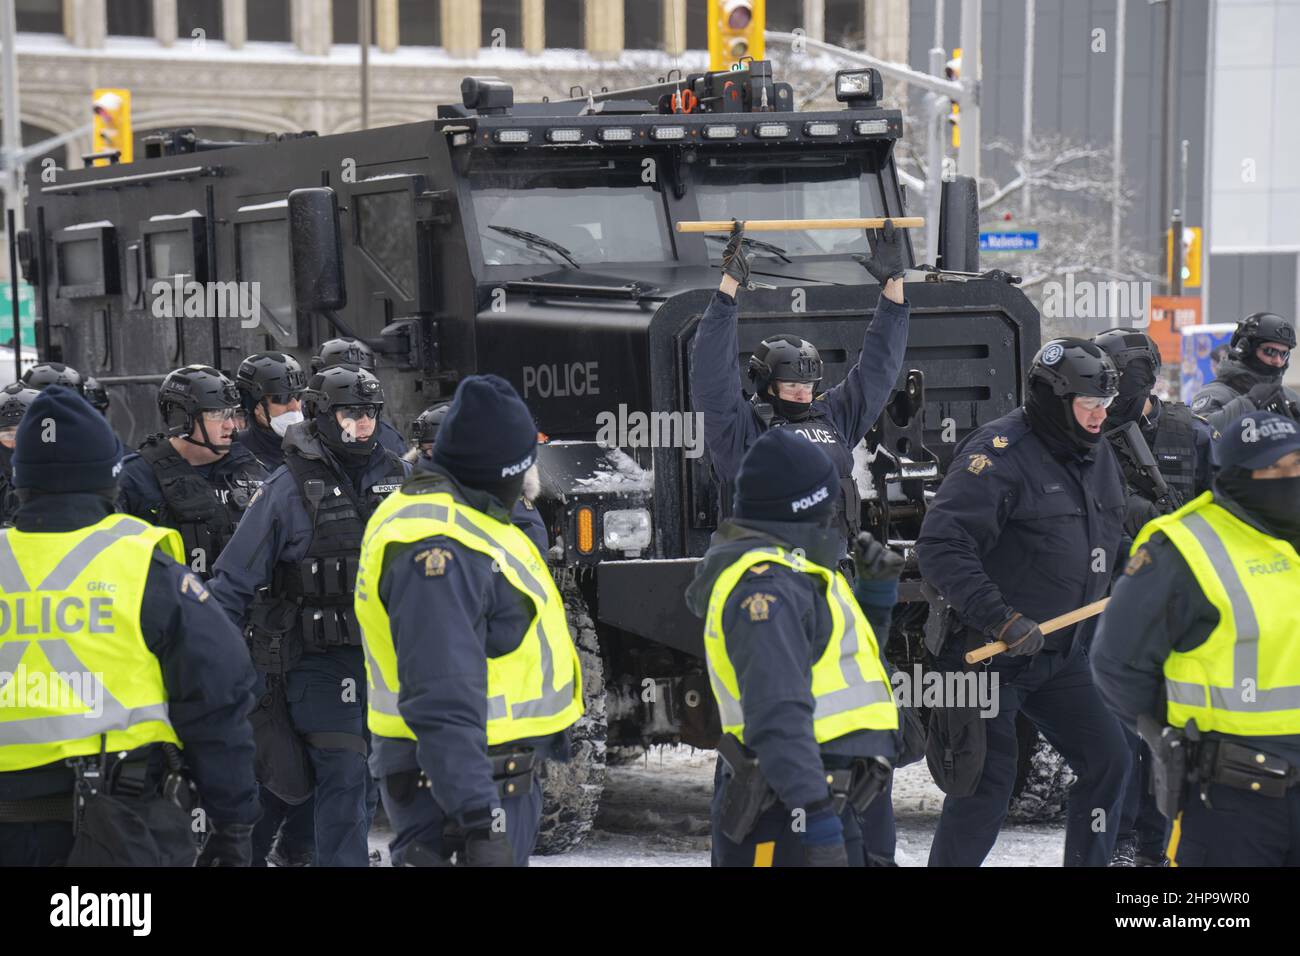 A police officer holds a baton up in front of an armored vehicle as police get ready to drive out Freedom Convoy protestors in Ottawa on Feb 19, 2022 Stock Photo